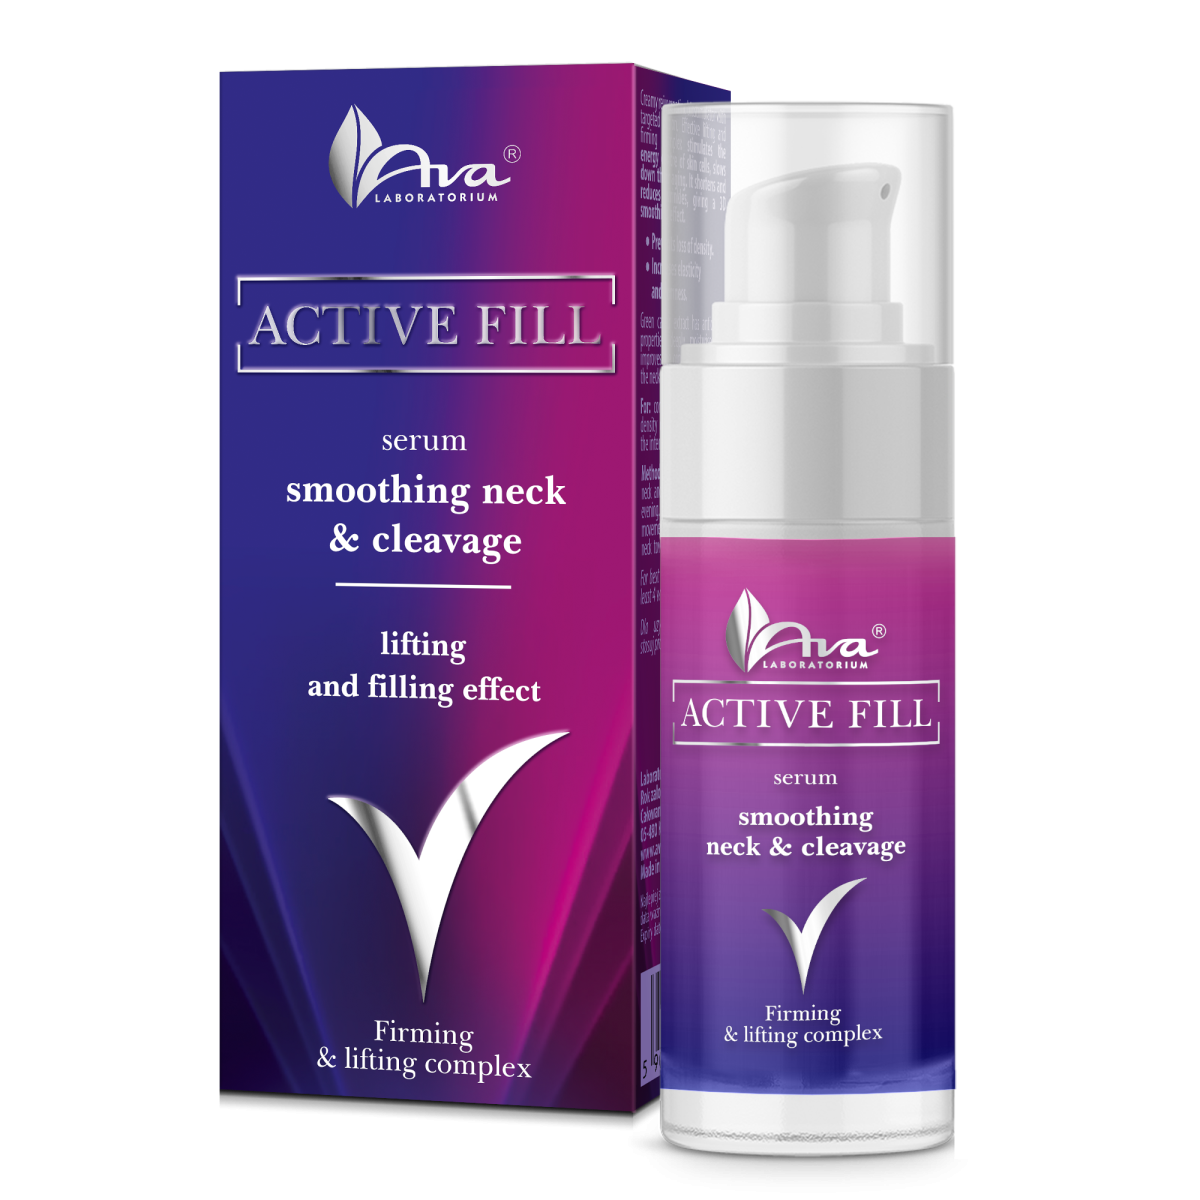 Active Fill – serum smoothing neck & cleavage